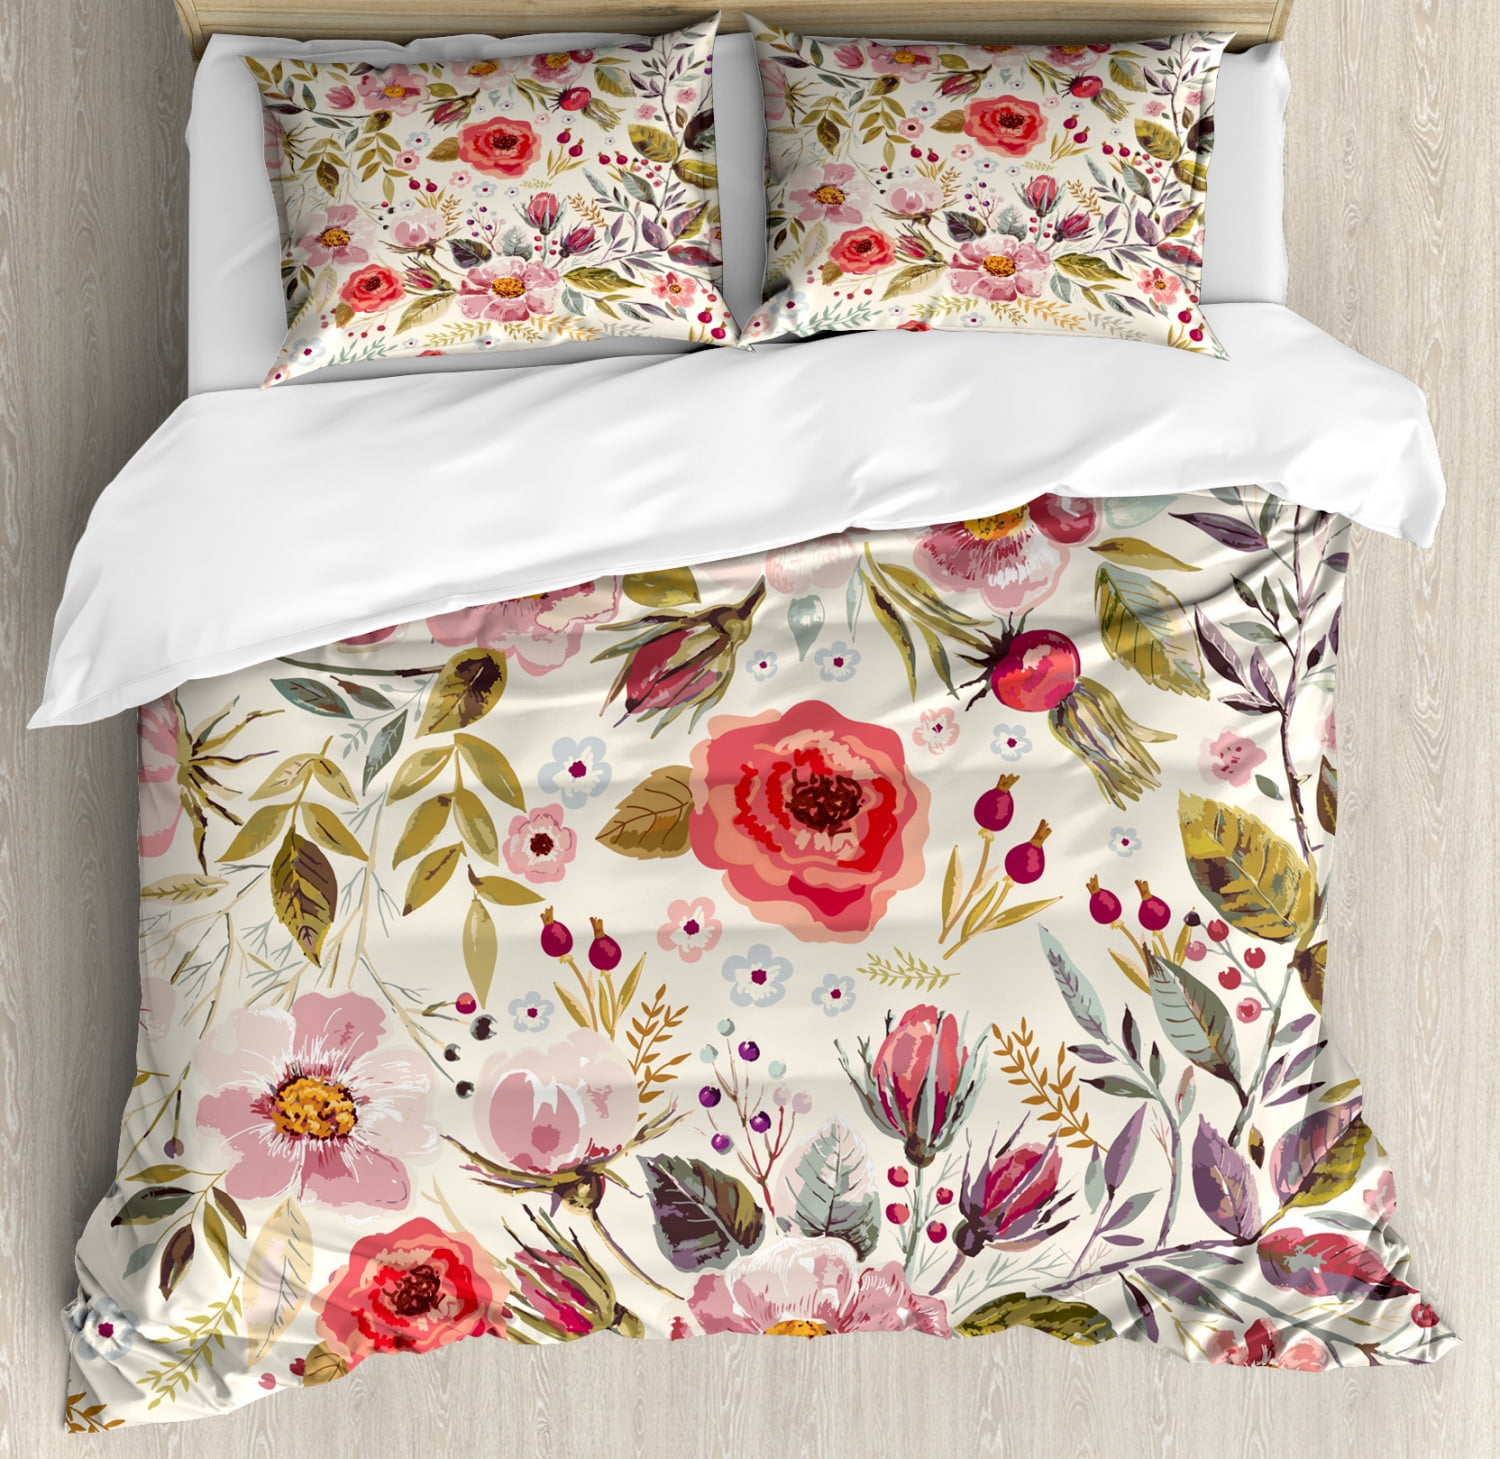 Flower Duvet Cover Set with Pillow Shams Pink Rose Tulip Abstract Print 